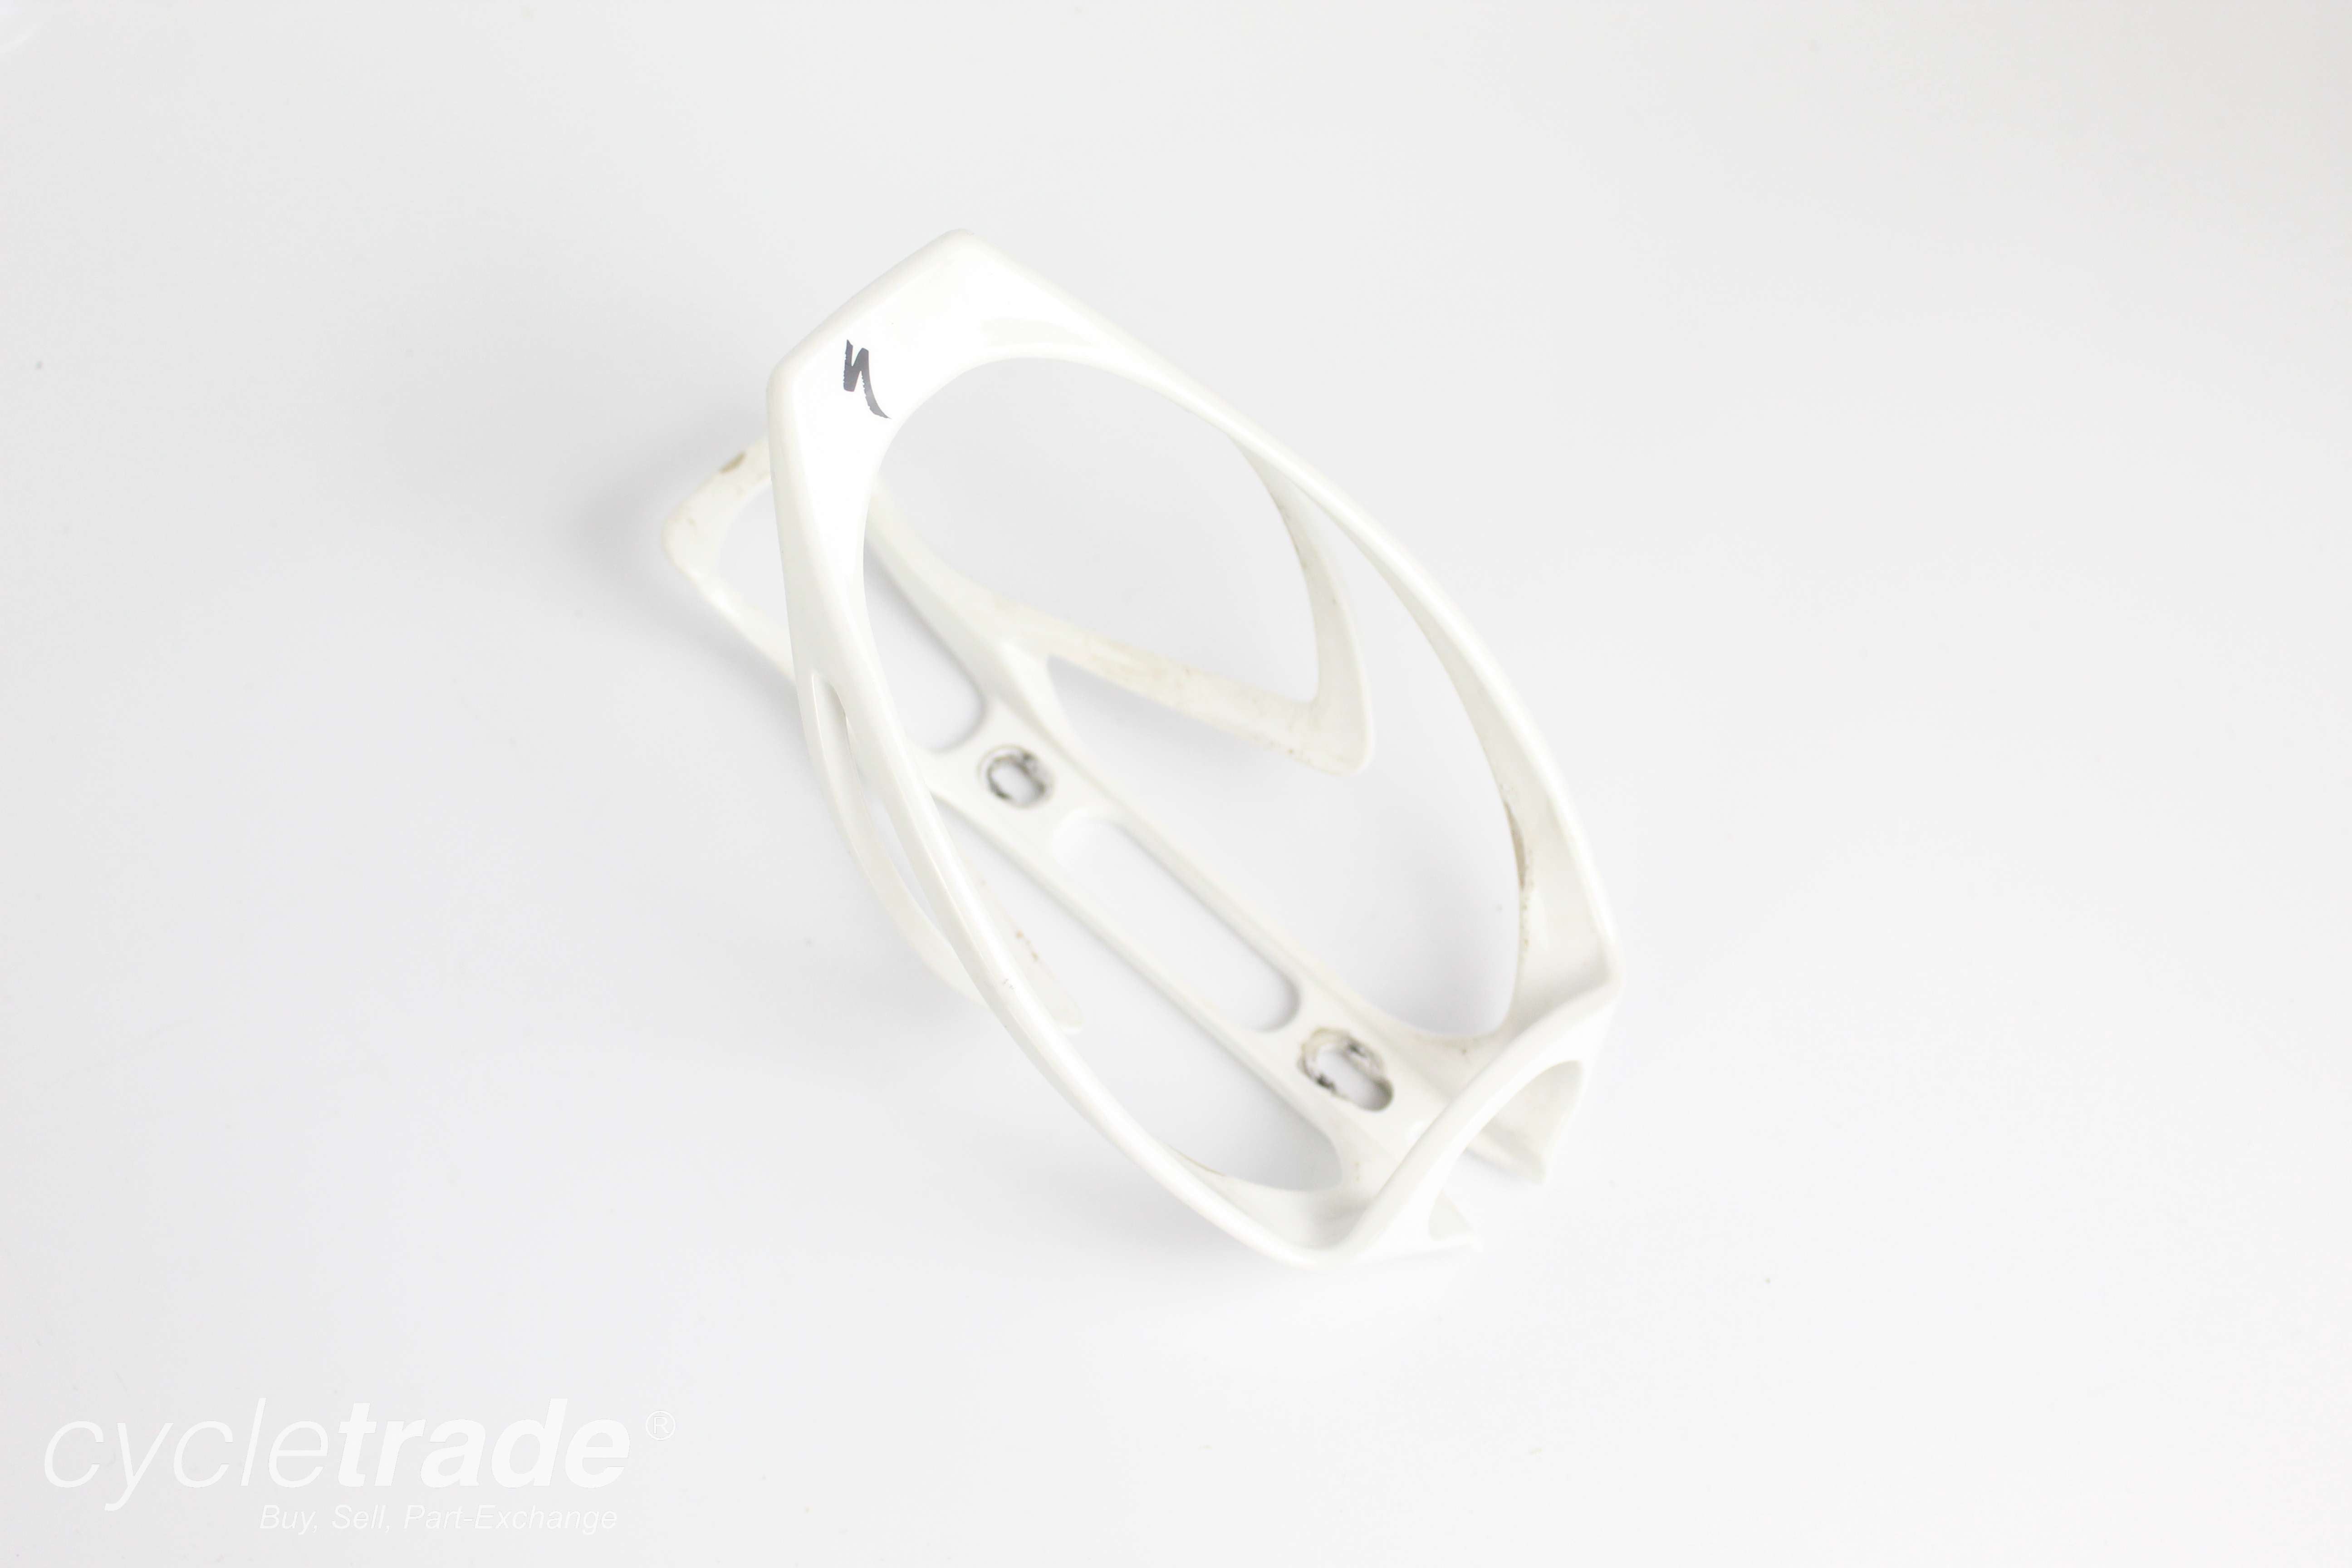 Bottle Cage- Specialized Rib Cage II Polymer White- Grade B